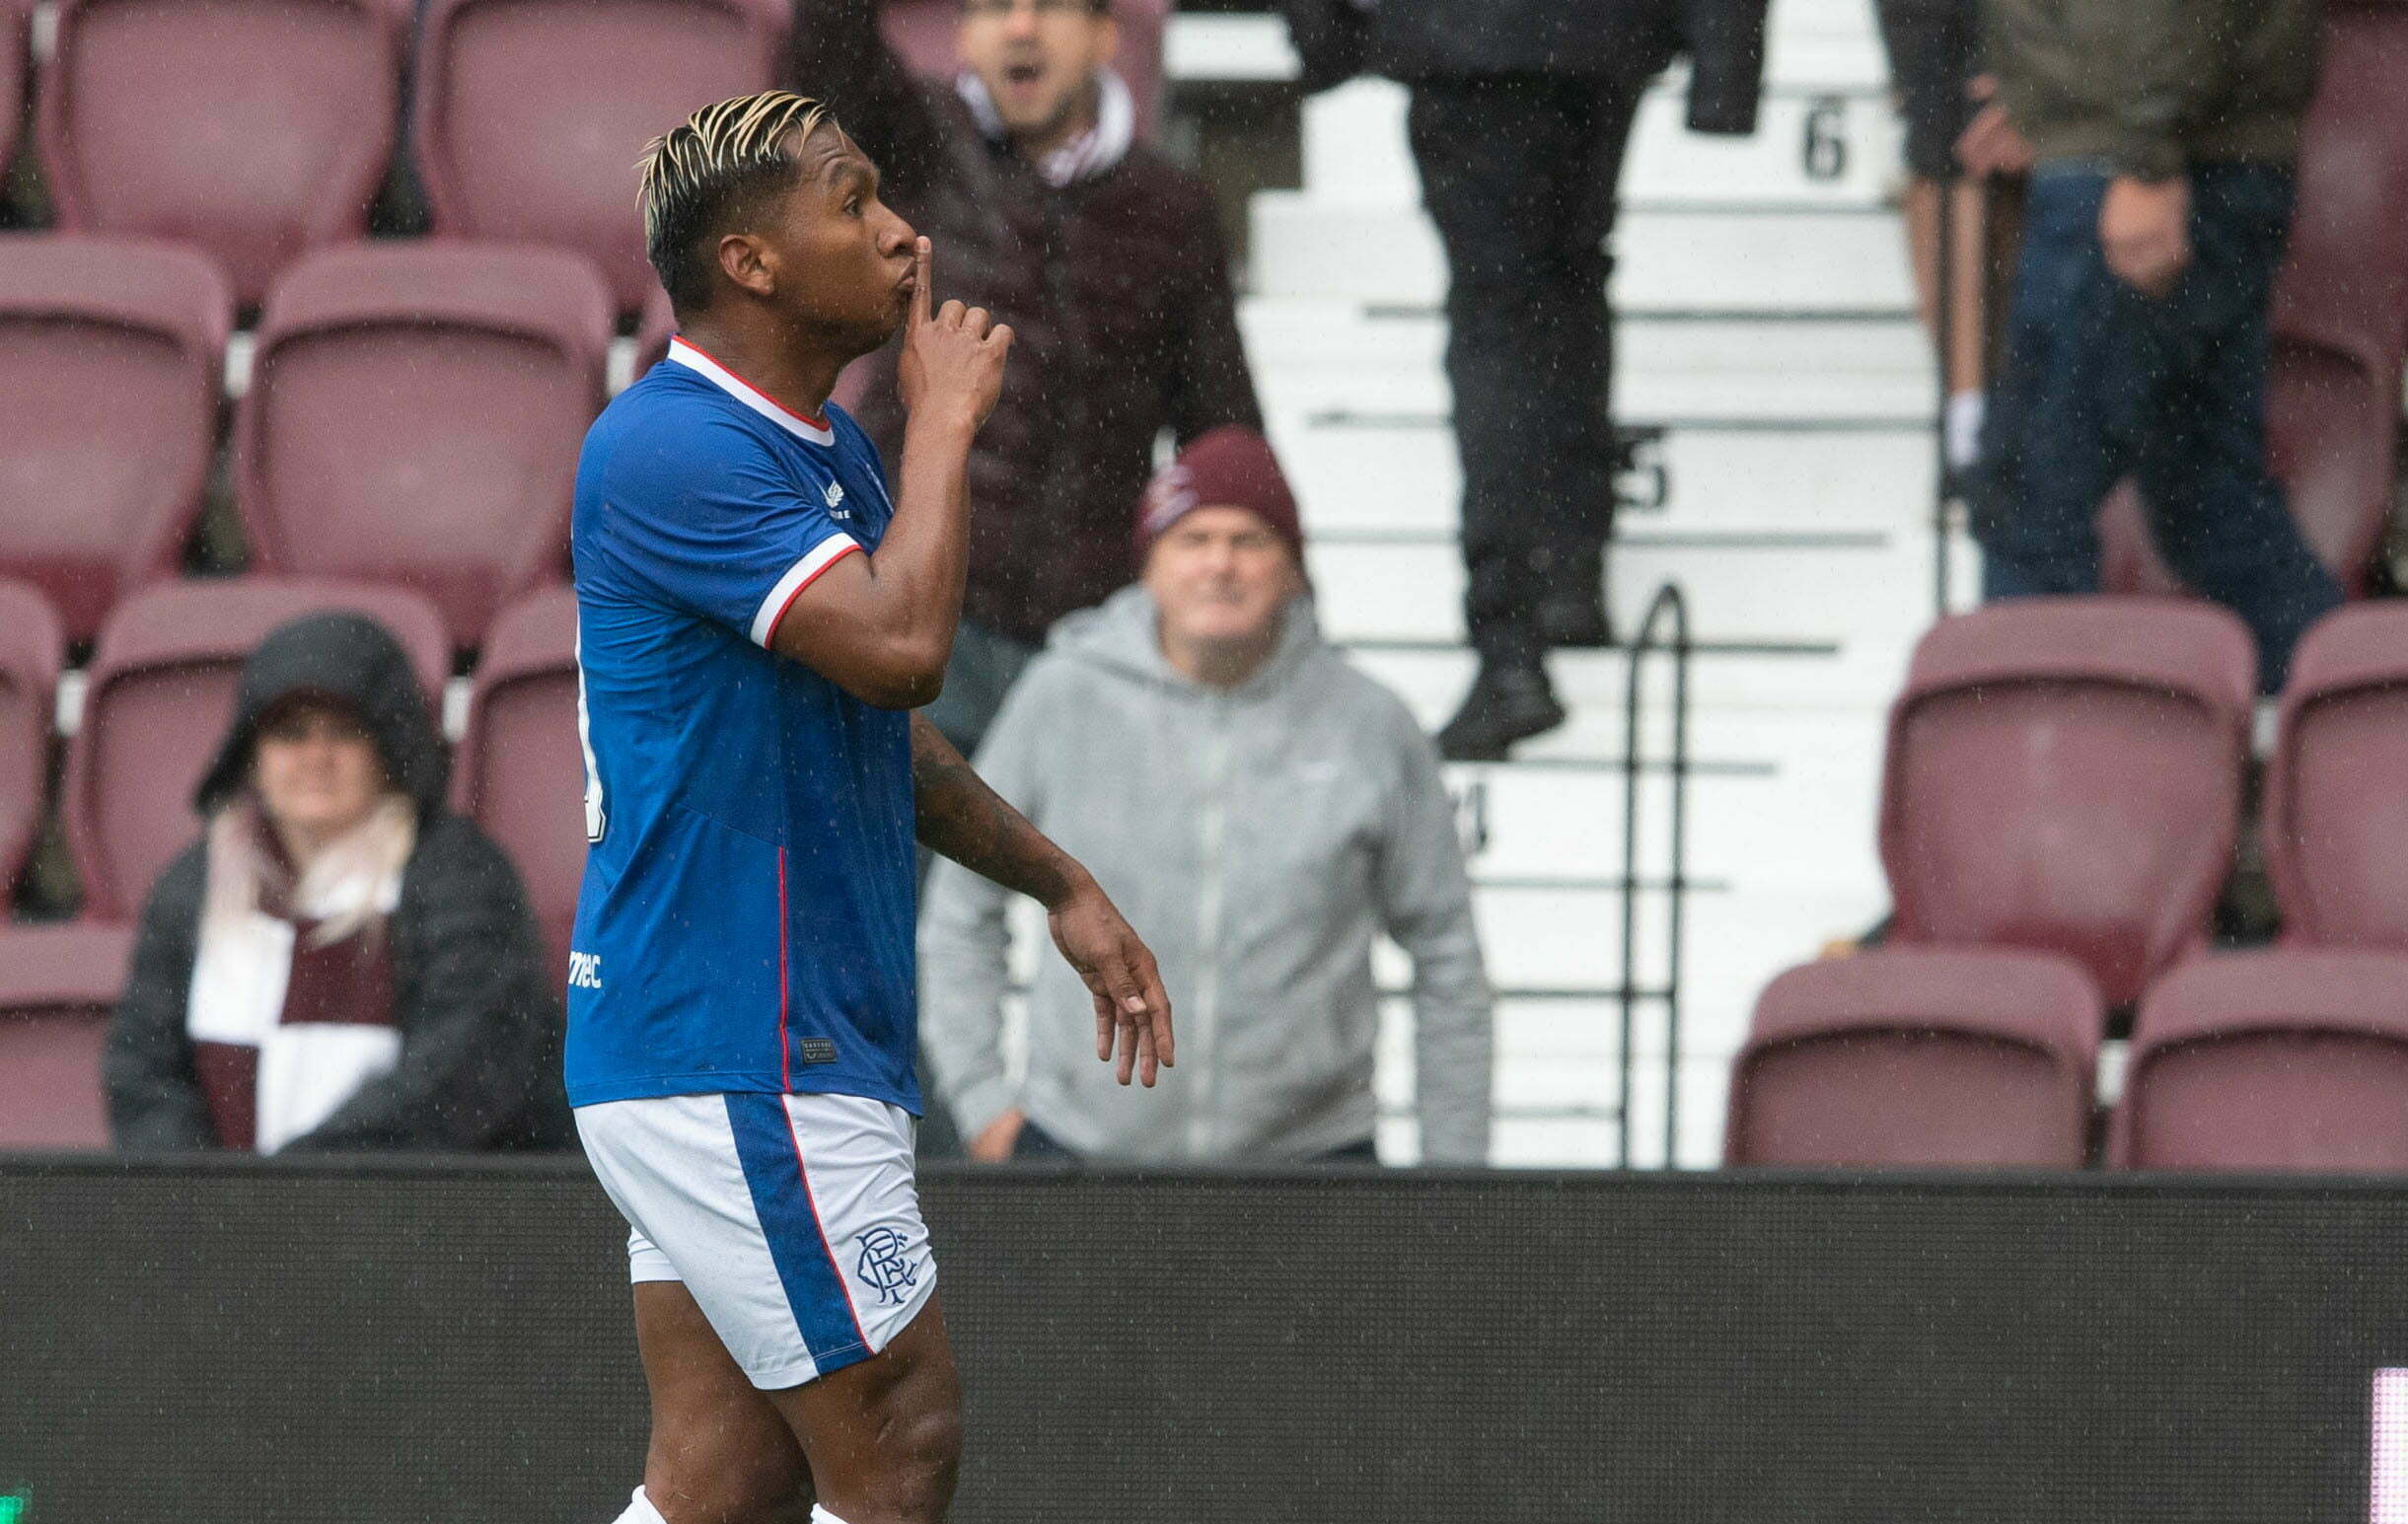 Hearts 0-4 Rangers – Full Time Report